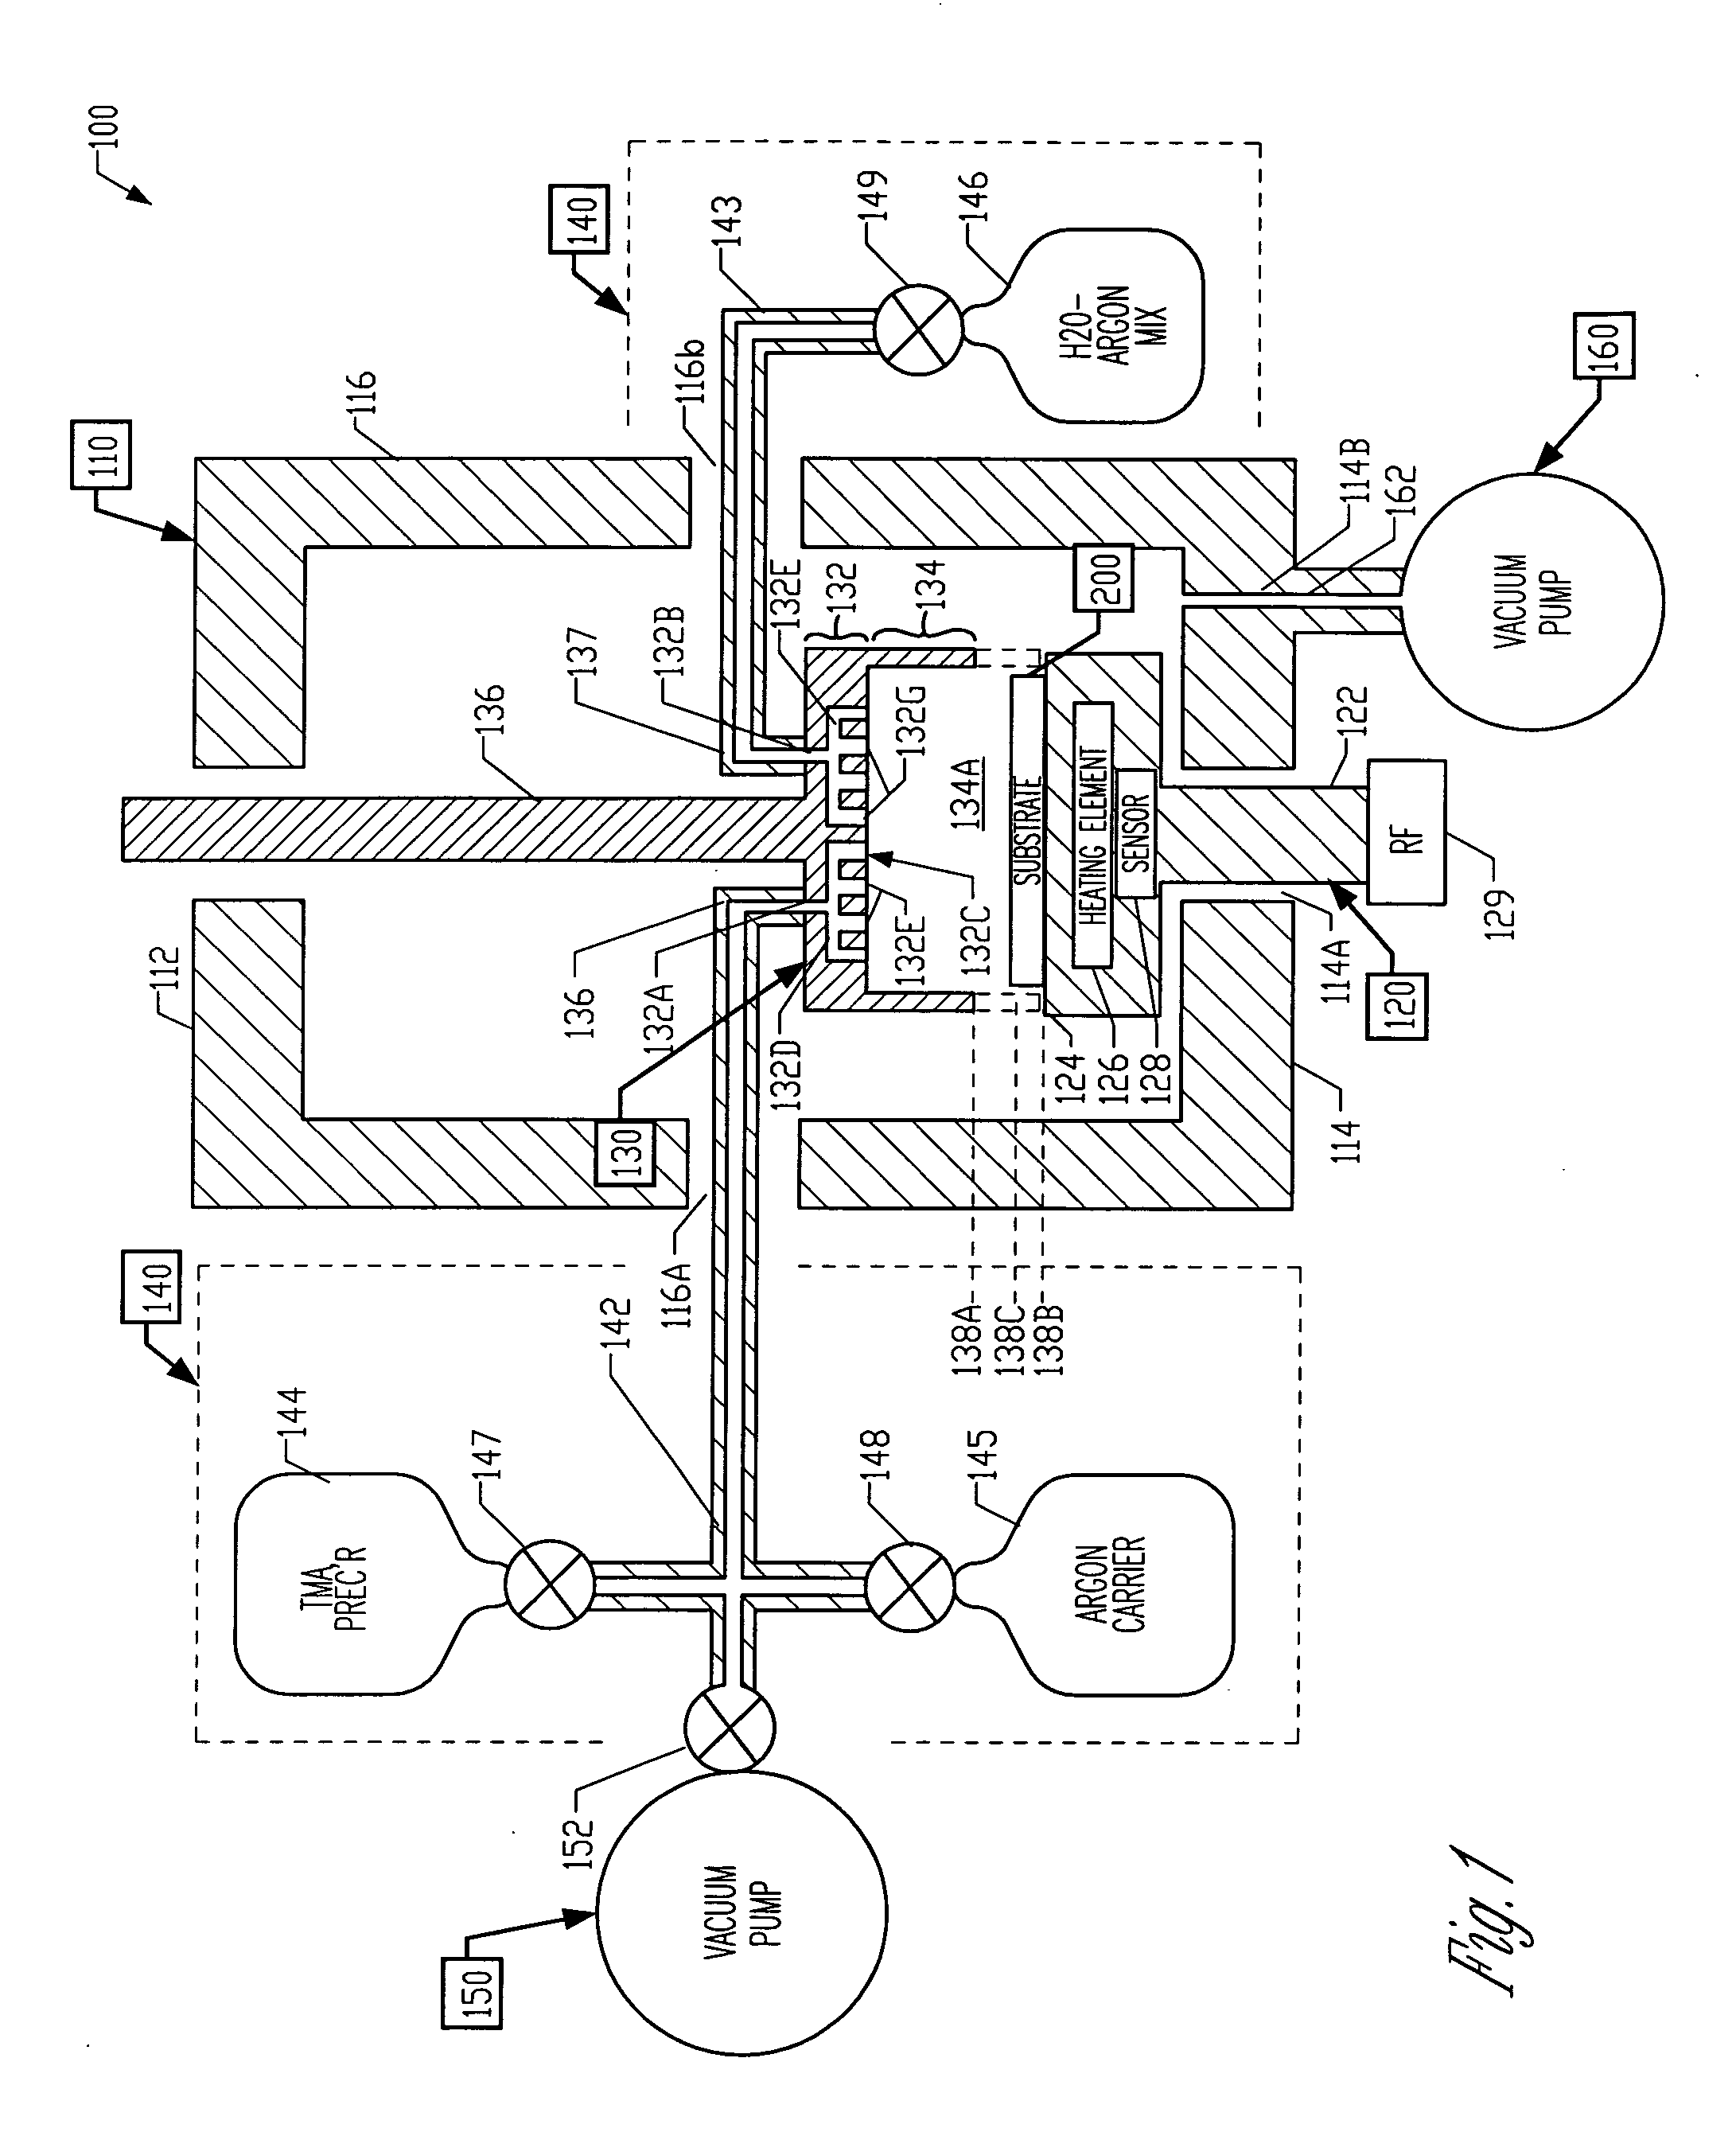 Systems and apparatus for atomic-layer deposition